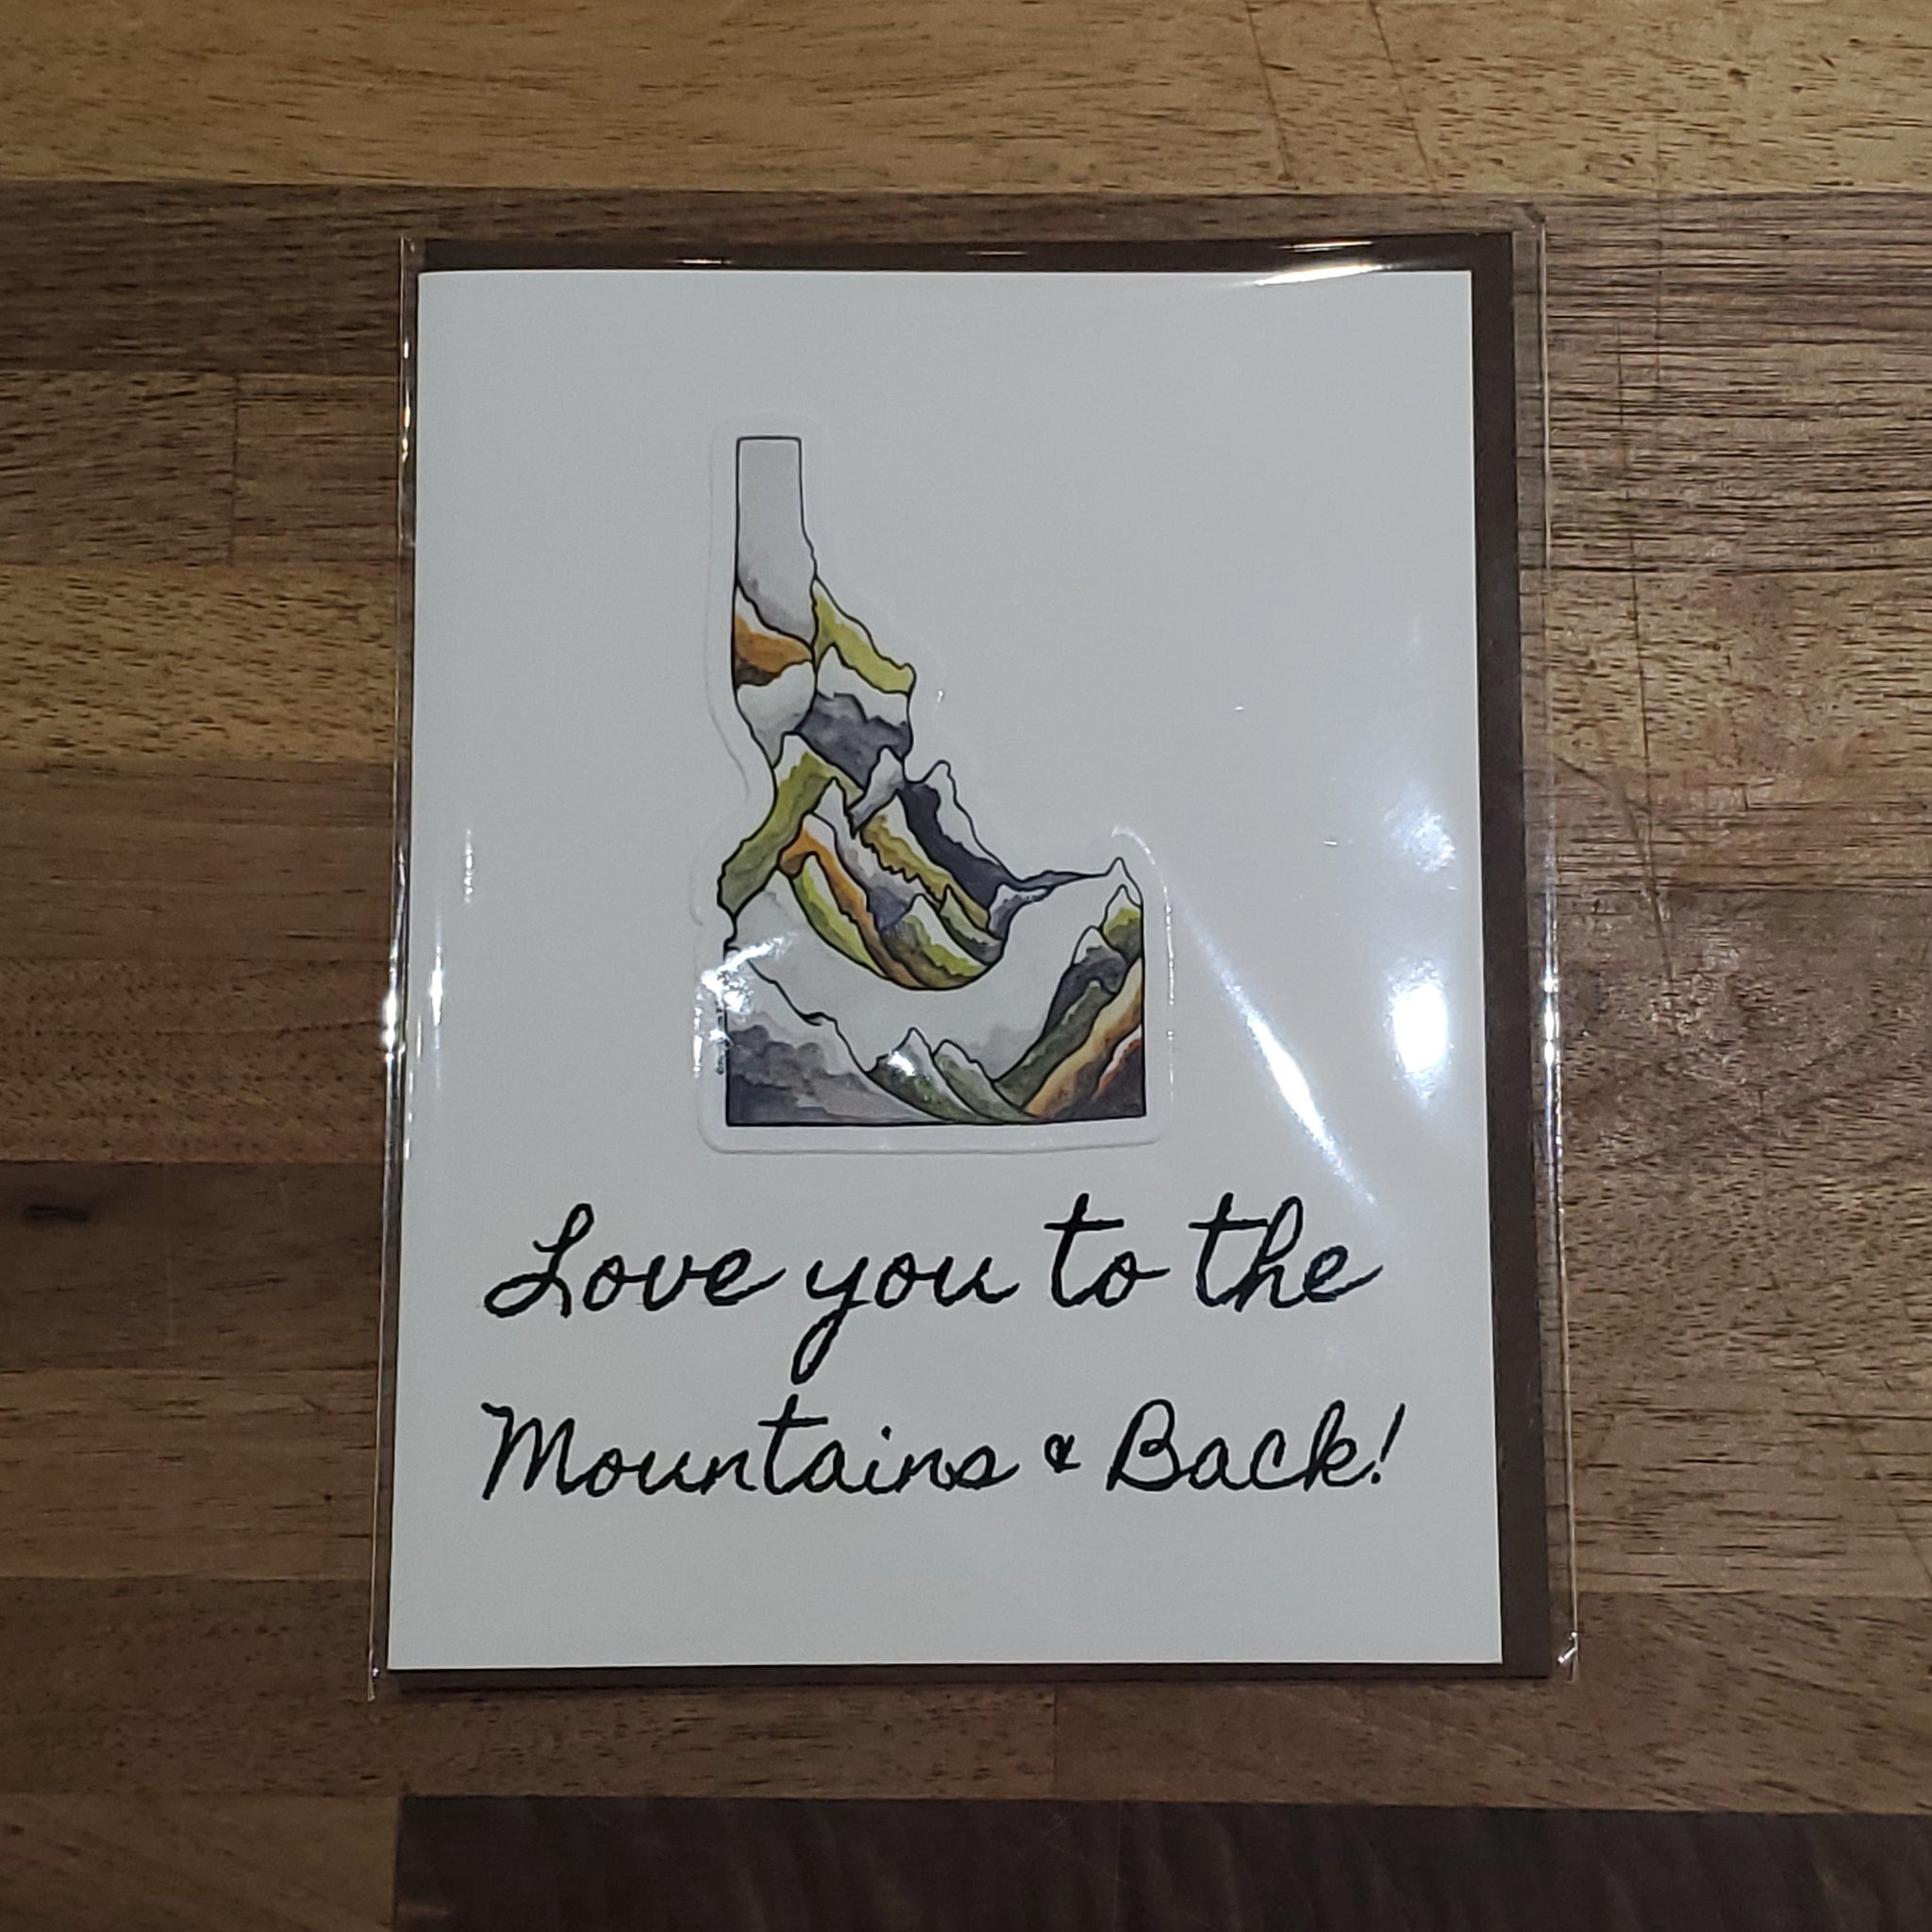 Lauren T Kistner Arts Card + Sticker "Love You to the Mountains and Back!"